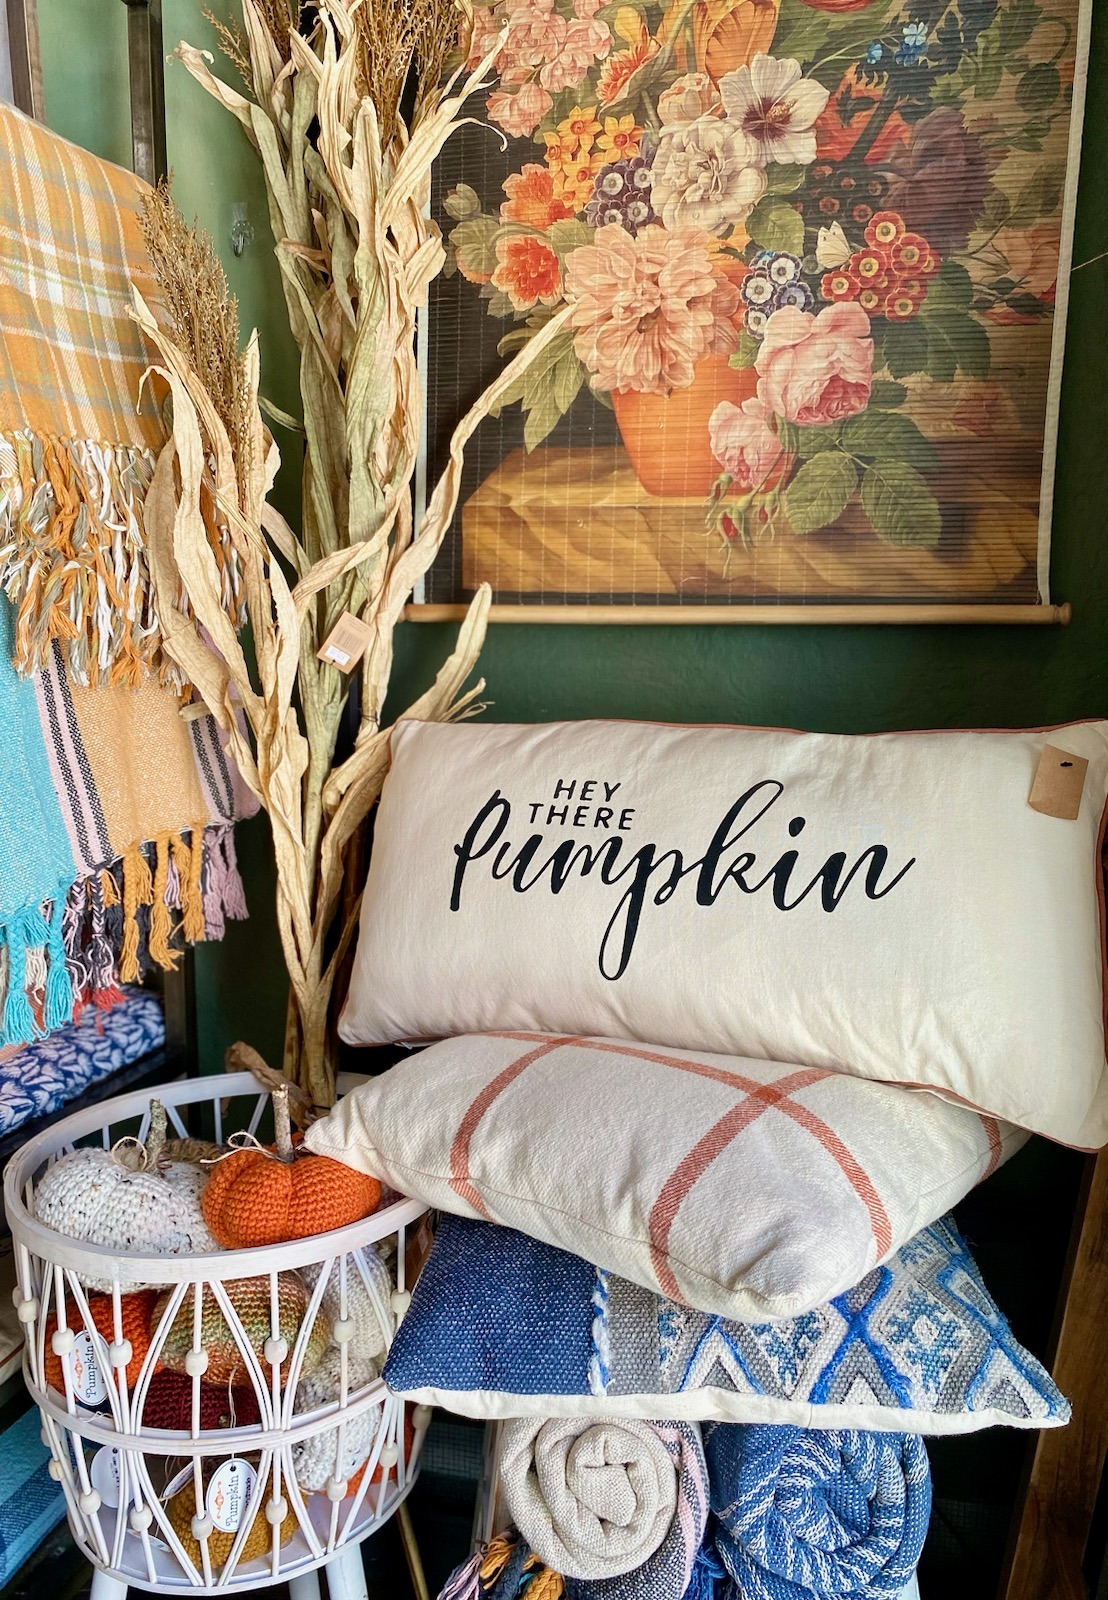 fall colored decor with floral art, embroidered pillows, blankets, and crocheted pumpkins